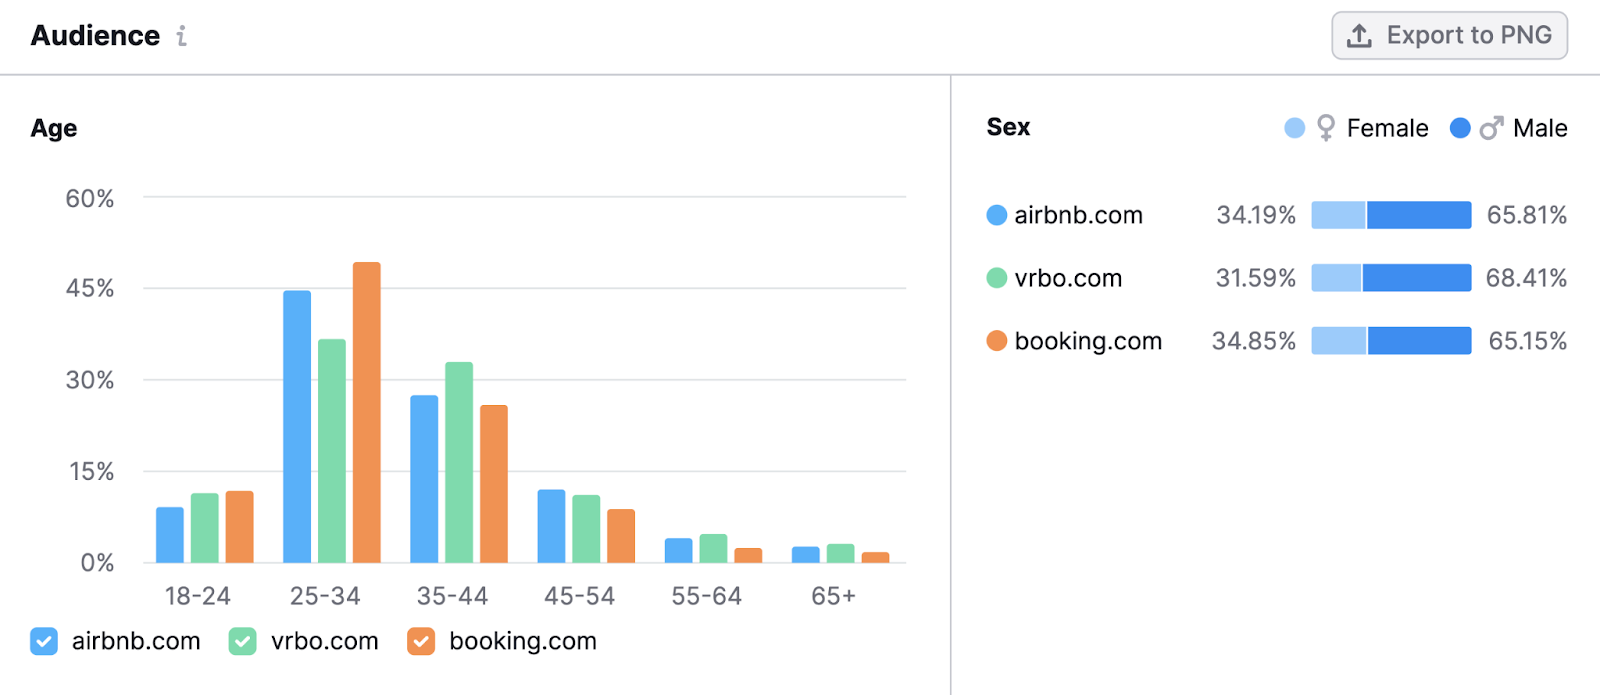 Audience demographics data, including age and sex, in One2Target tool